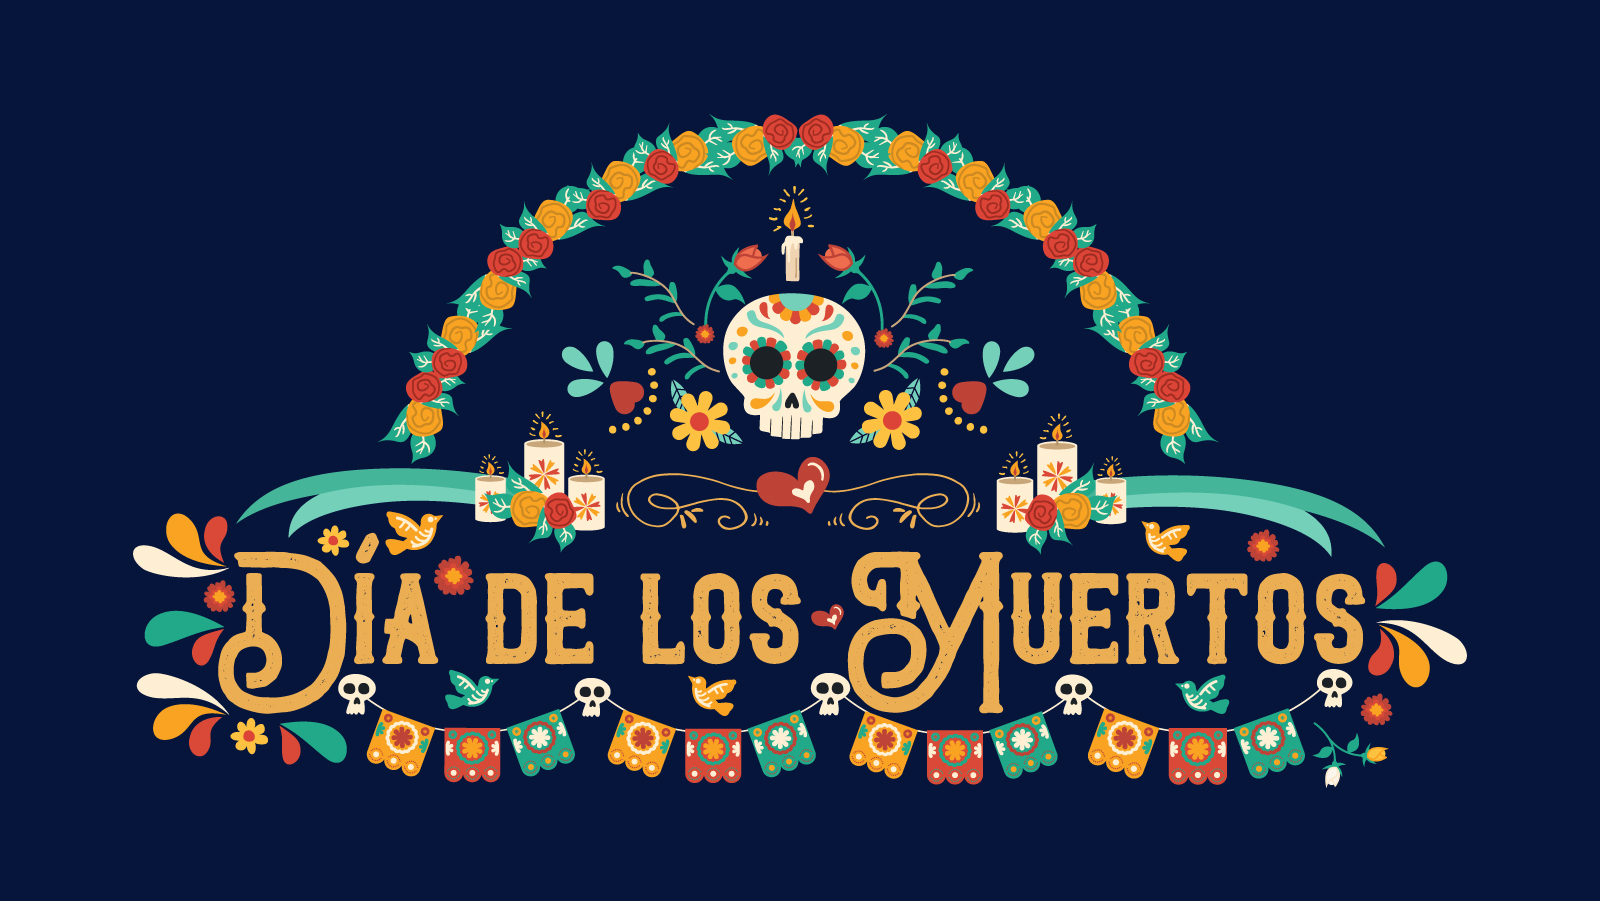 Dia de los muertos words decorated with sugar skulls, candles, and flowers